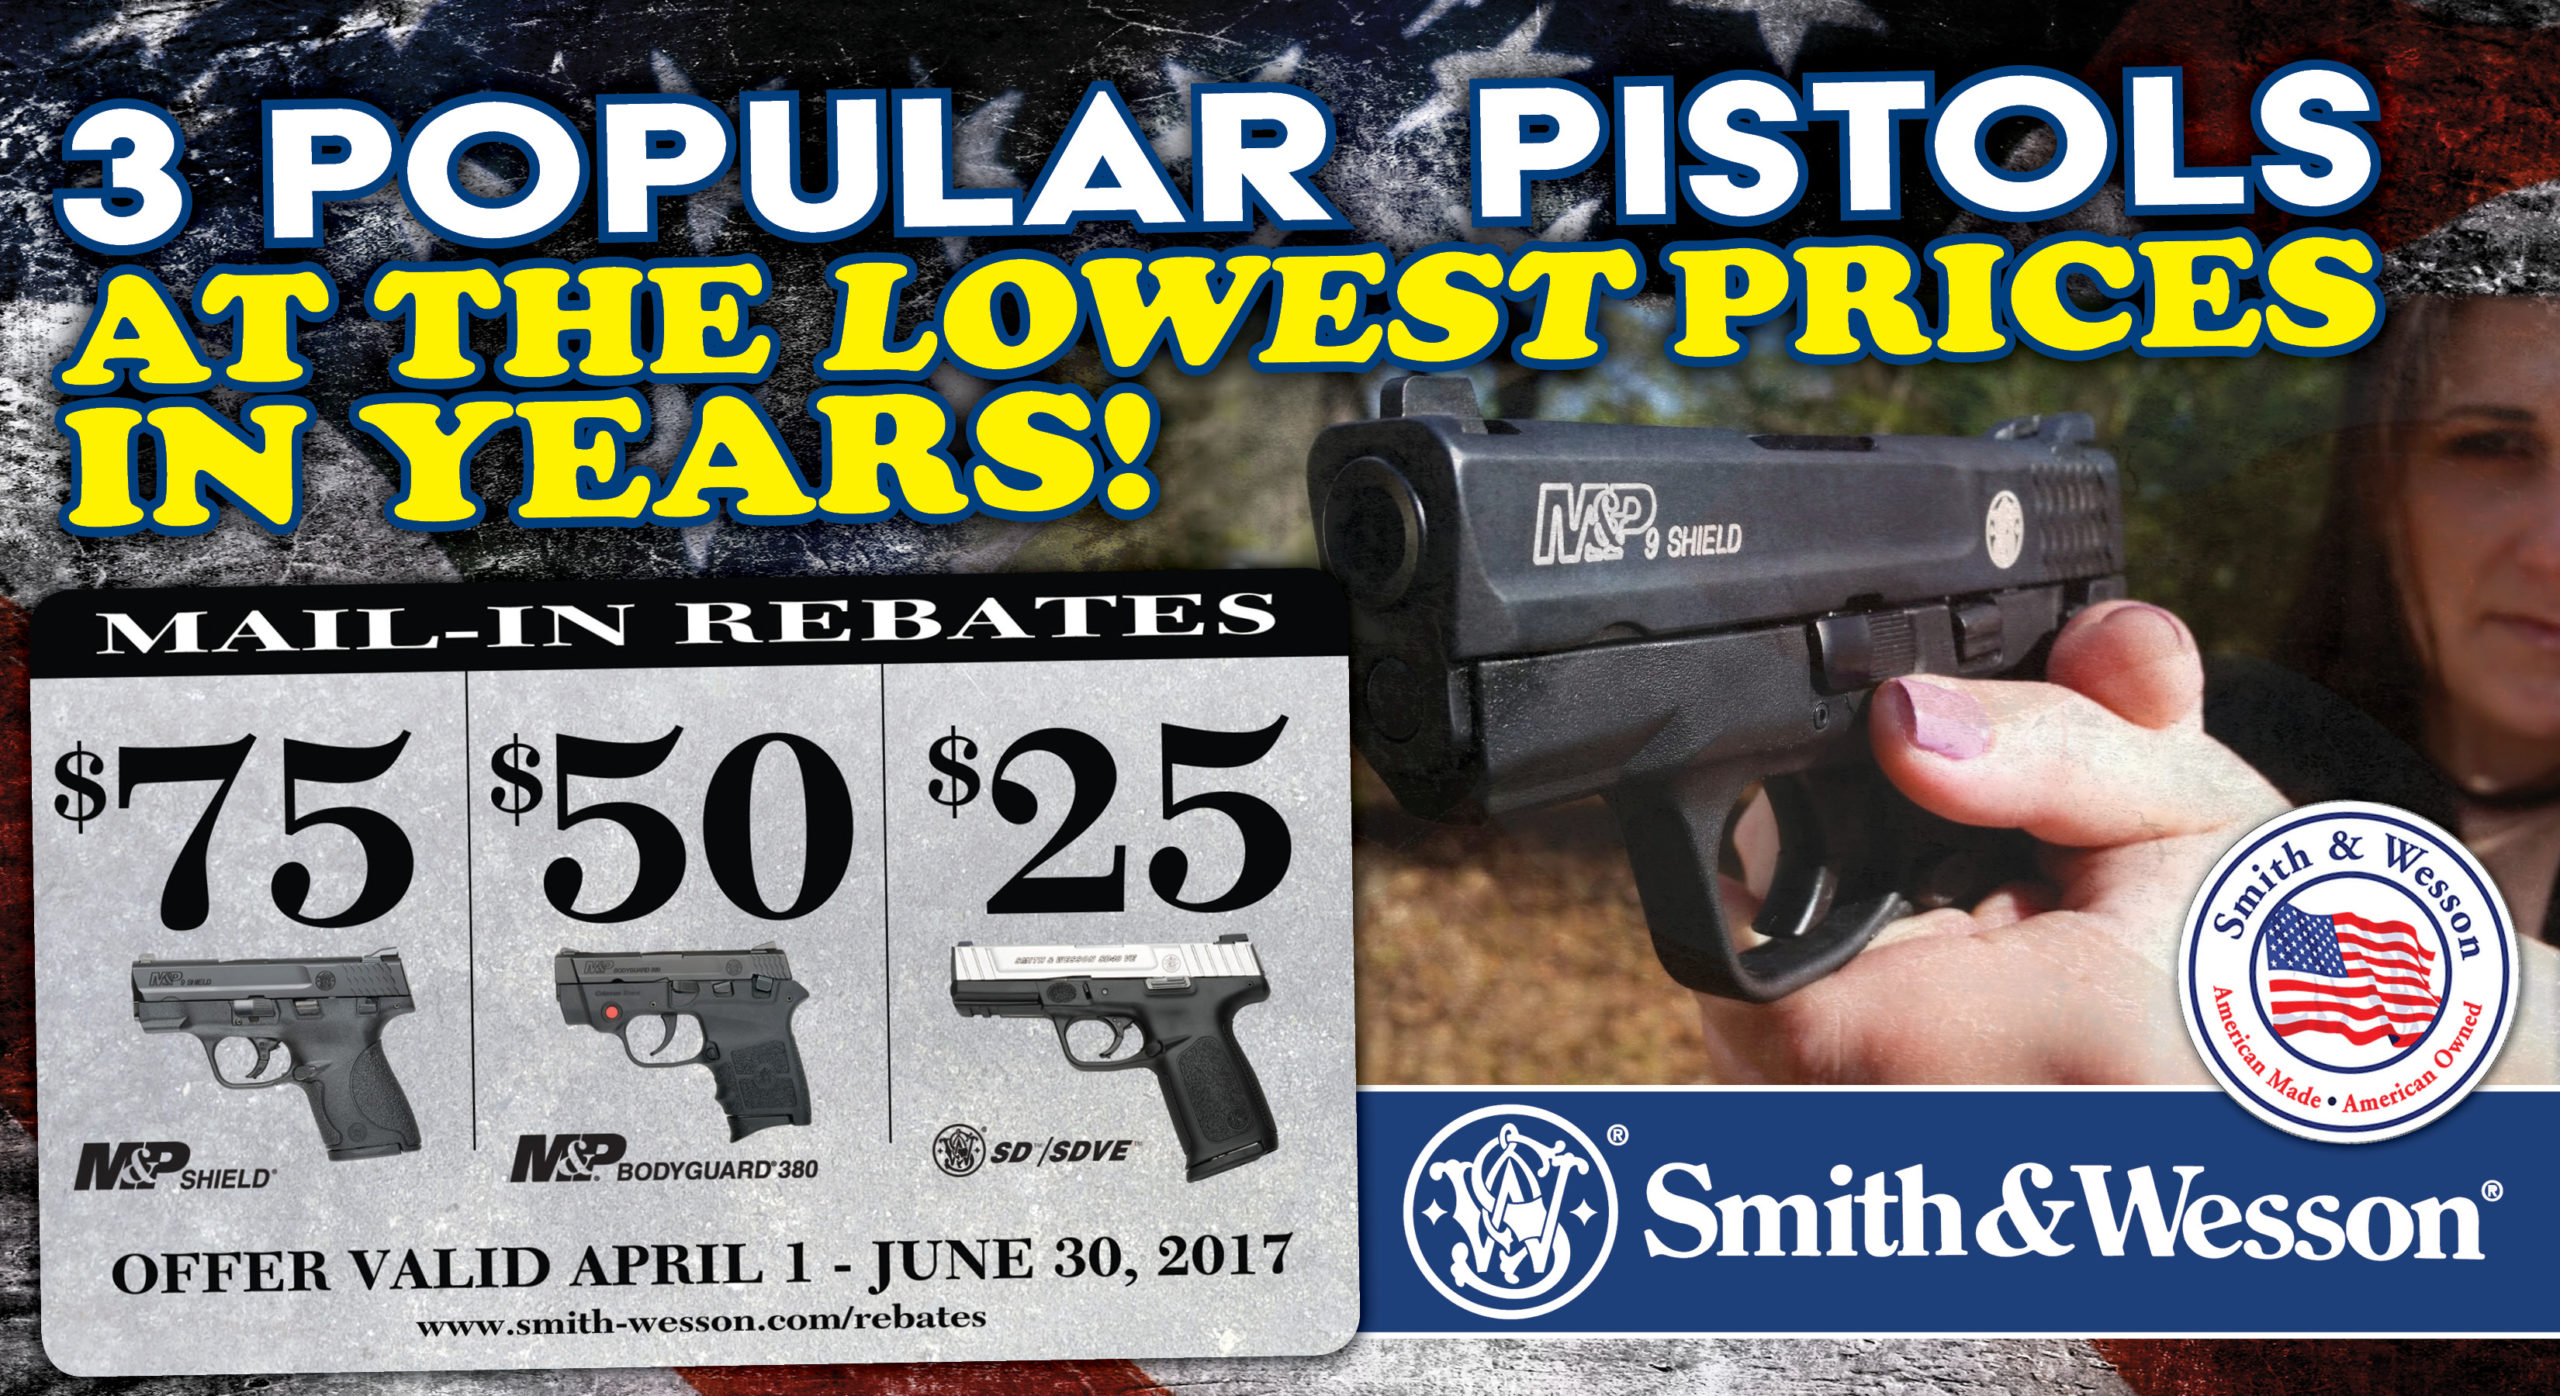 dgs-vegas-introduces-the-smith-and-wesson-firearm-frenzy-nevada-shooters